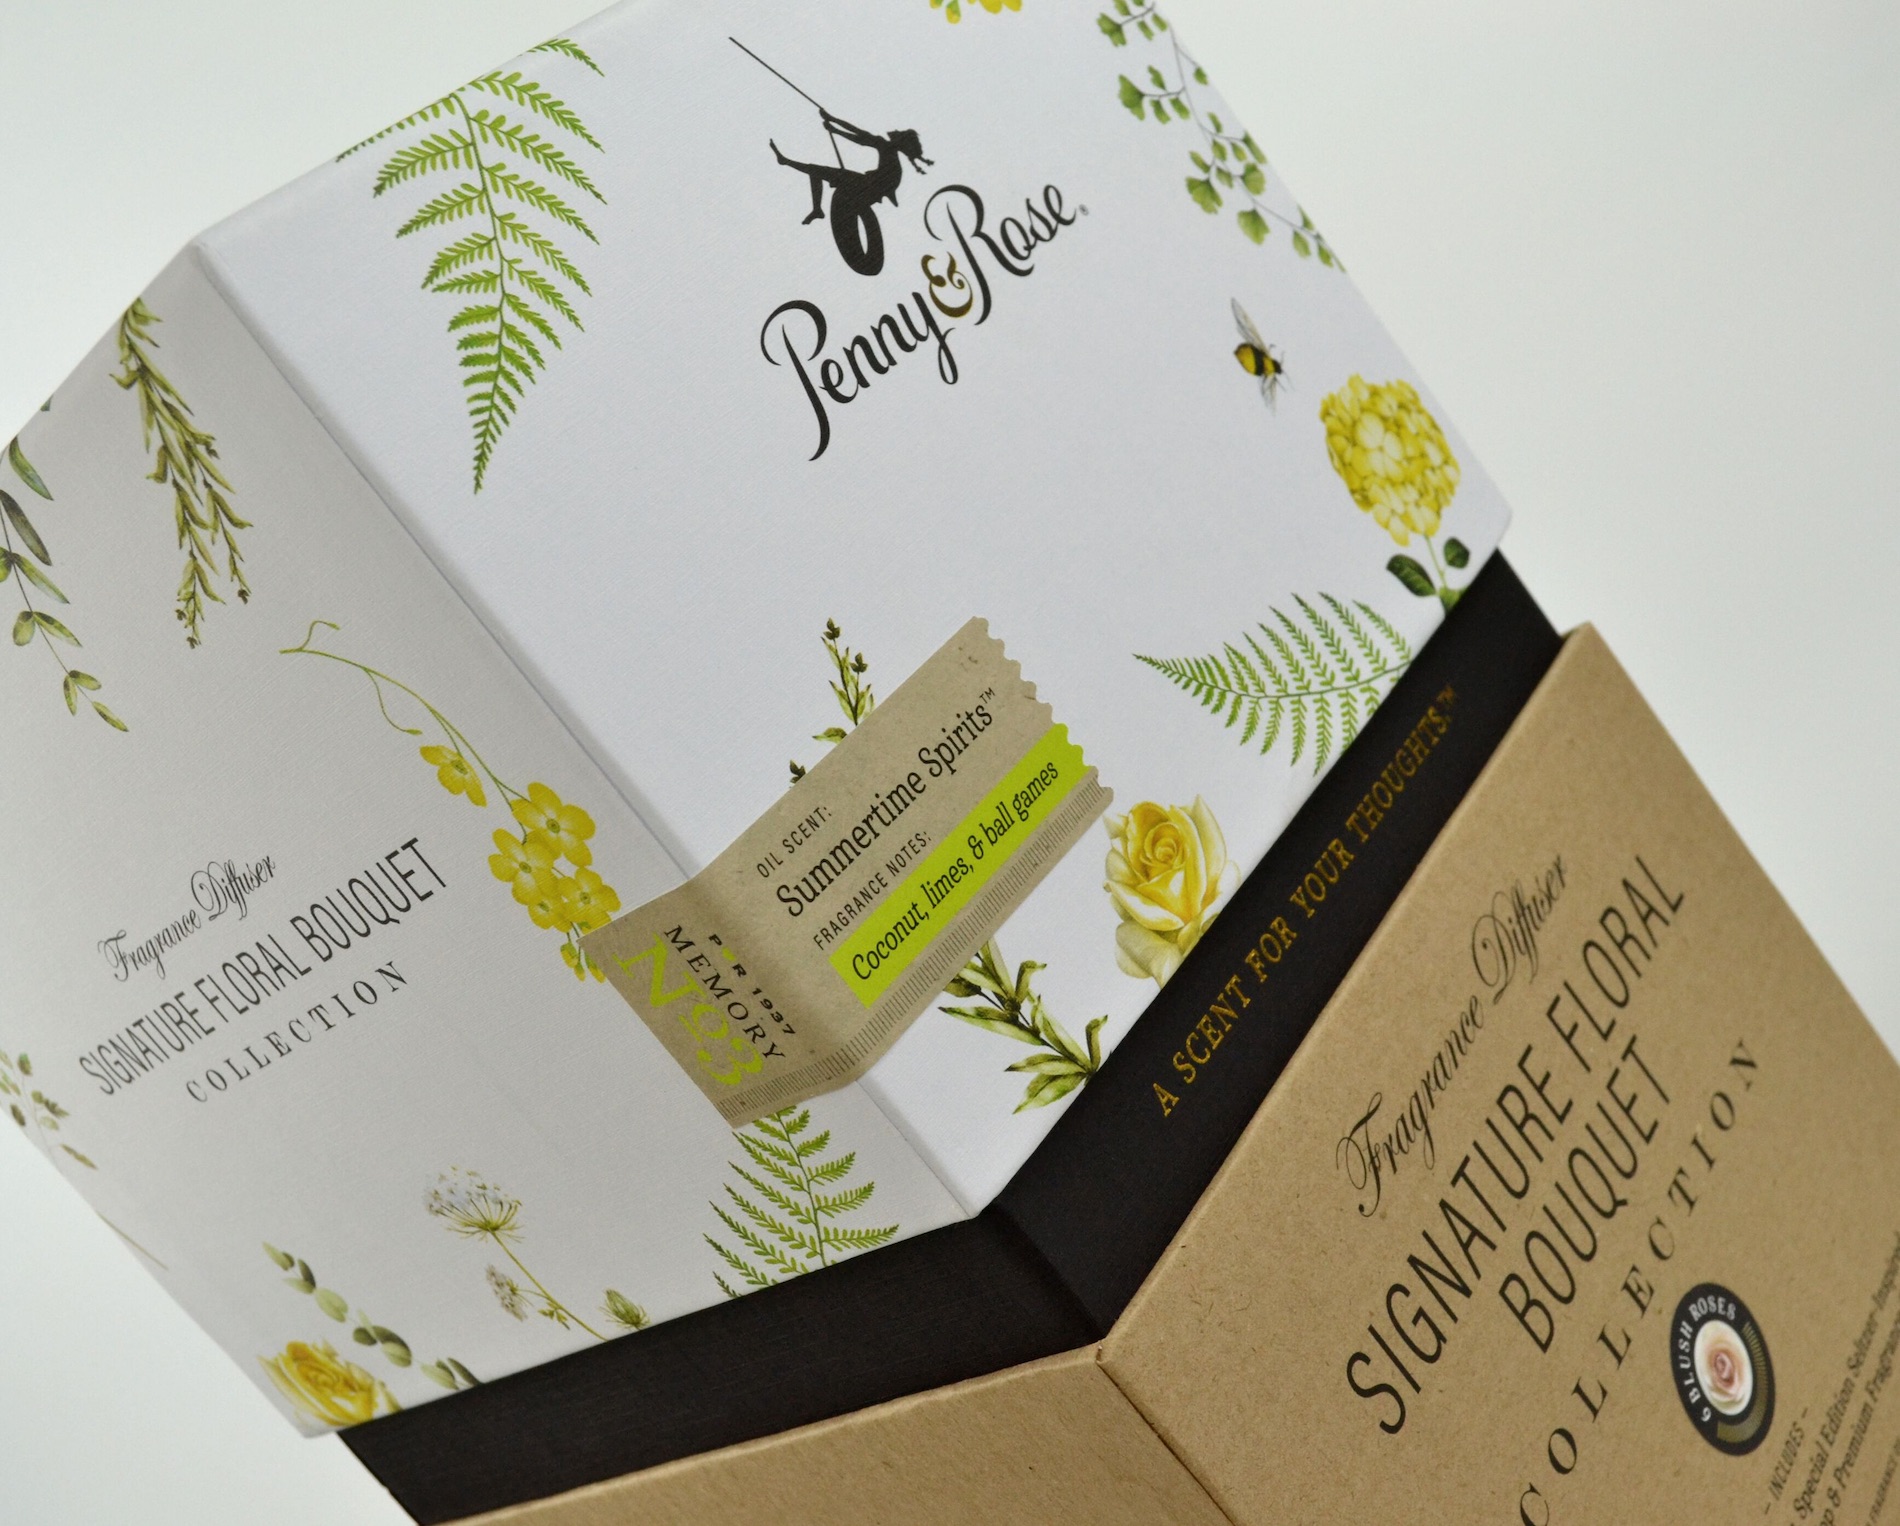 Penny & Rose branding and packaging